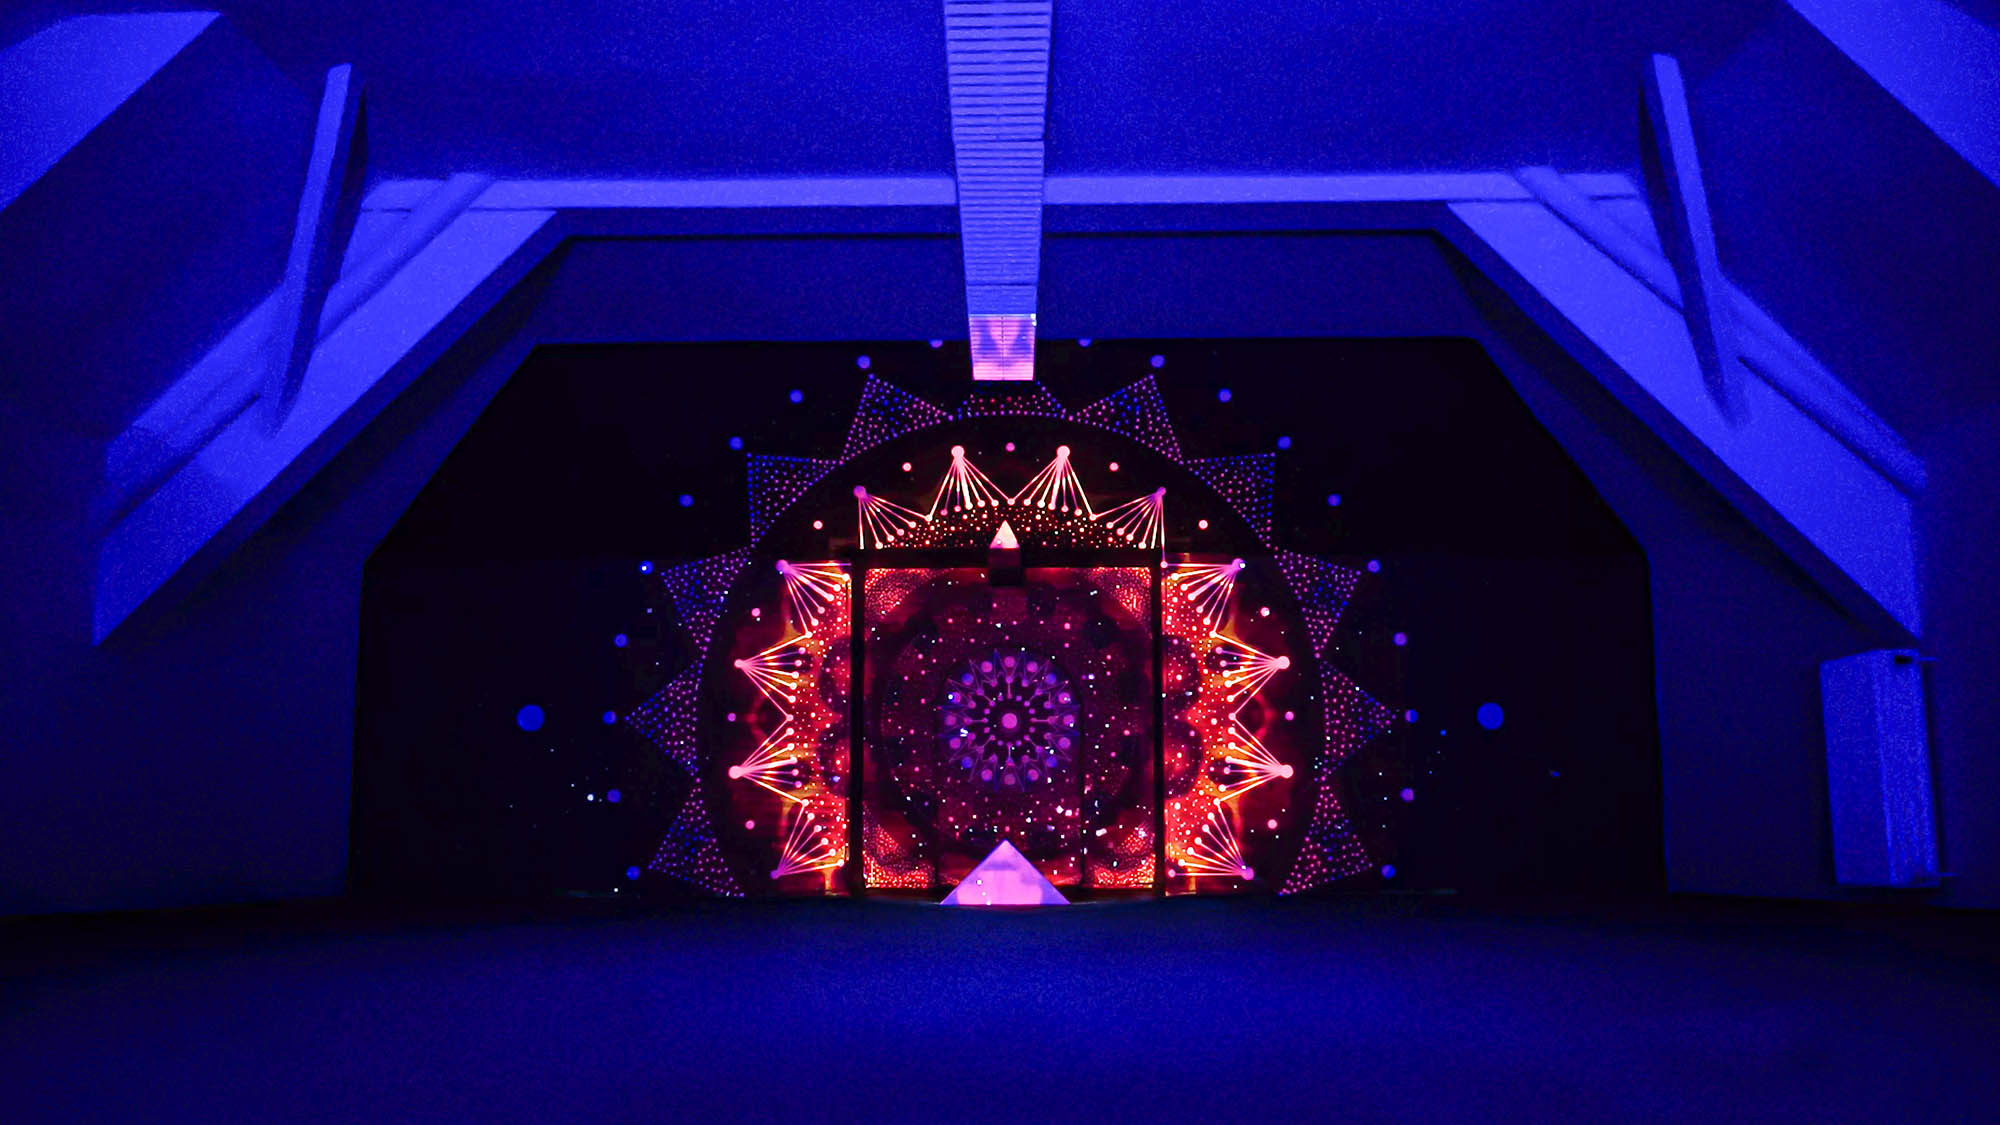 Image of a video art installation combined with a mural painting. Mandala geometric design with projection mapping art.